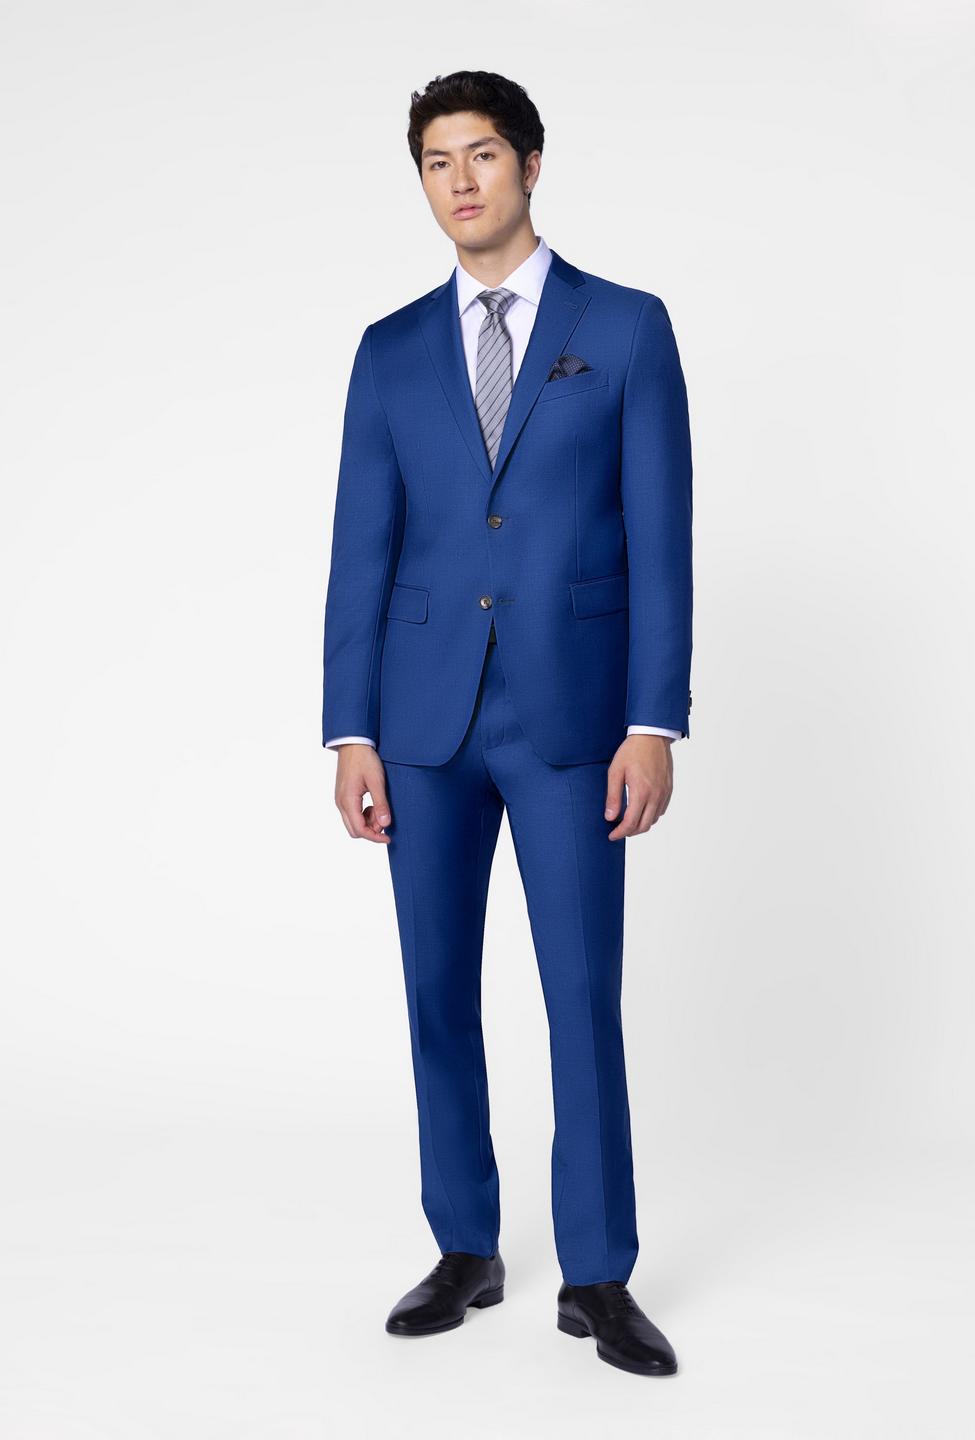 Teal suit - Hemsworth Solid Design from Premium Indochino Collection